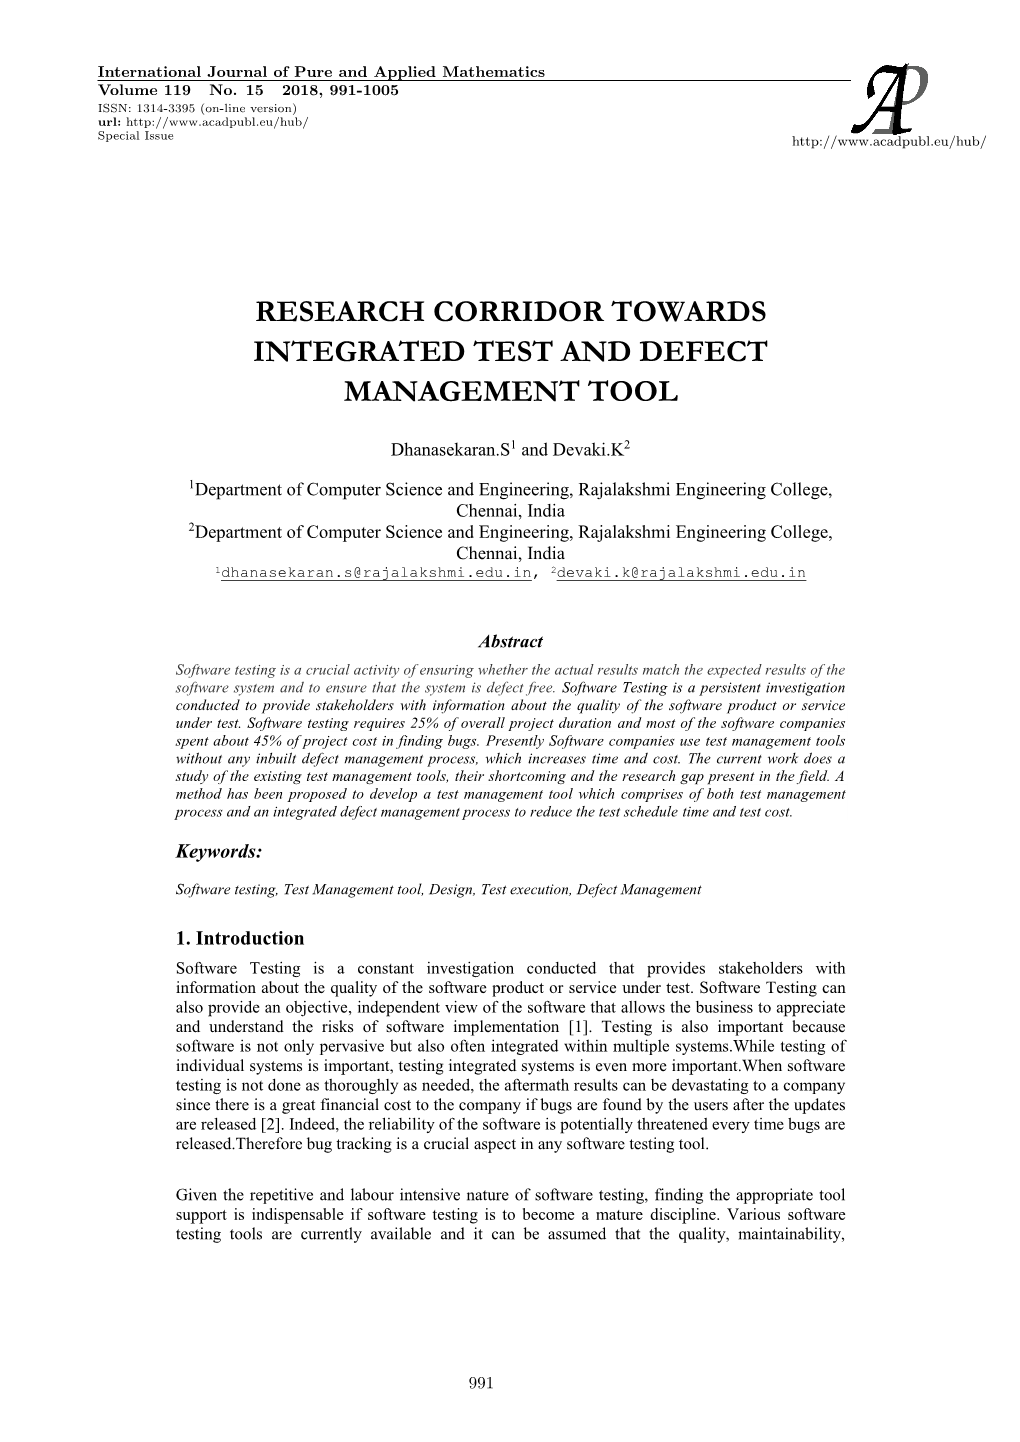 Research Corridor Towards Integrated Test and Defect Management Tool